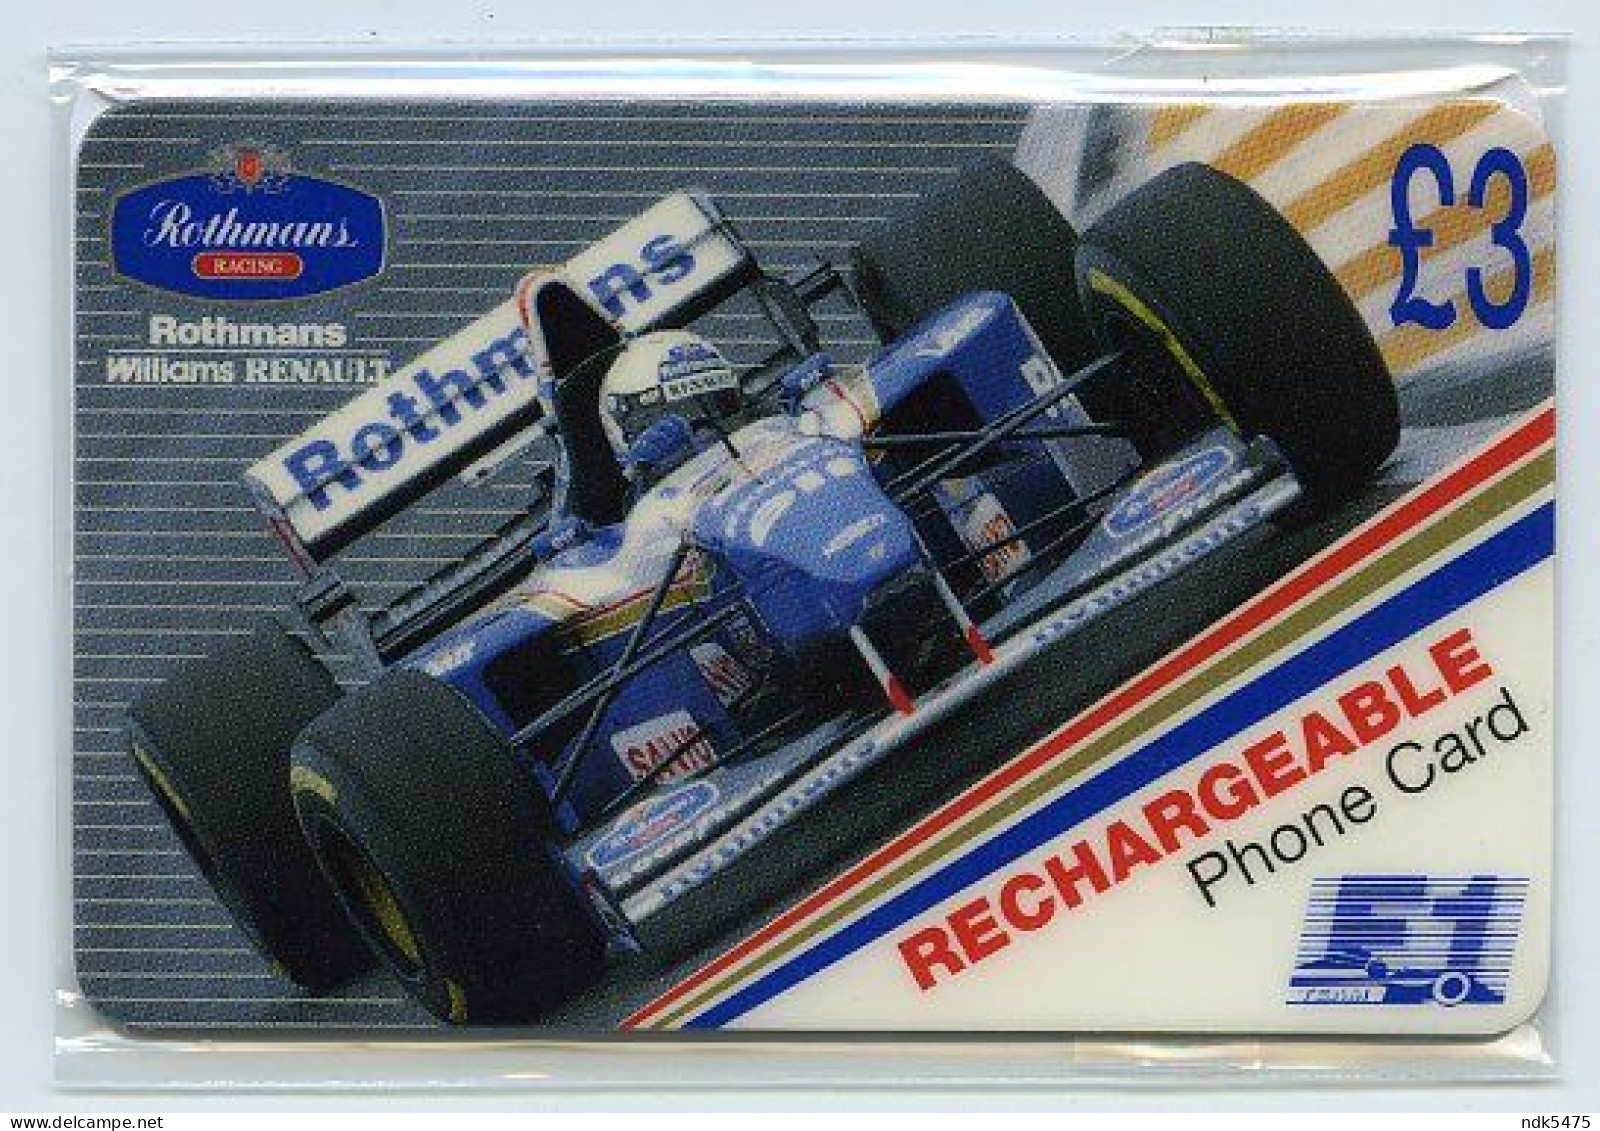 ROTHMANS WILLIAMS RENAULT - RECHARGEABLE PHONE CARD £3 (UNITEL) (SEALED / MINT) - [ 8] Companies Issues